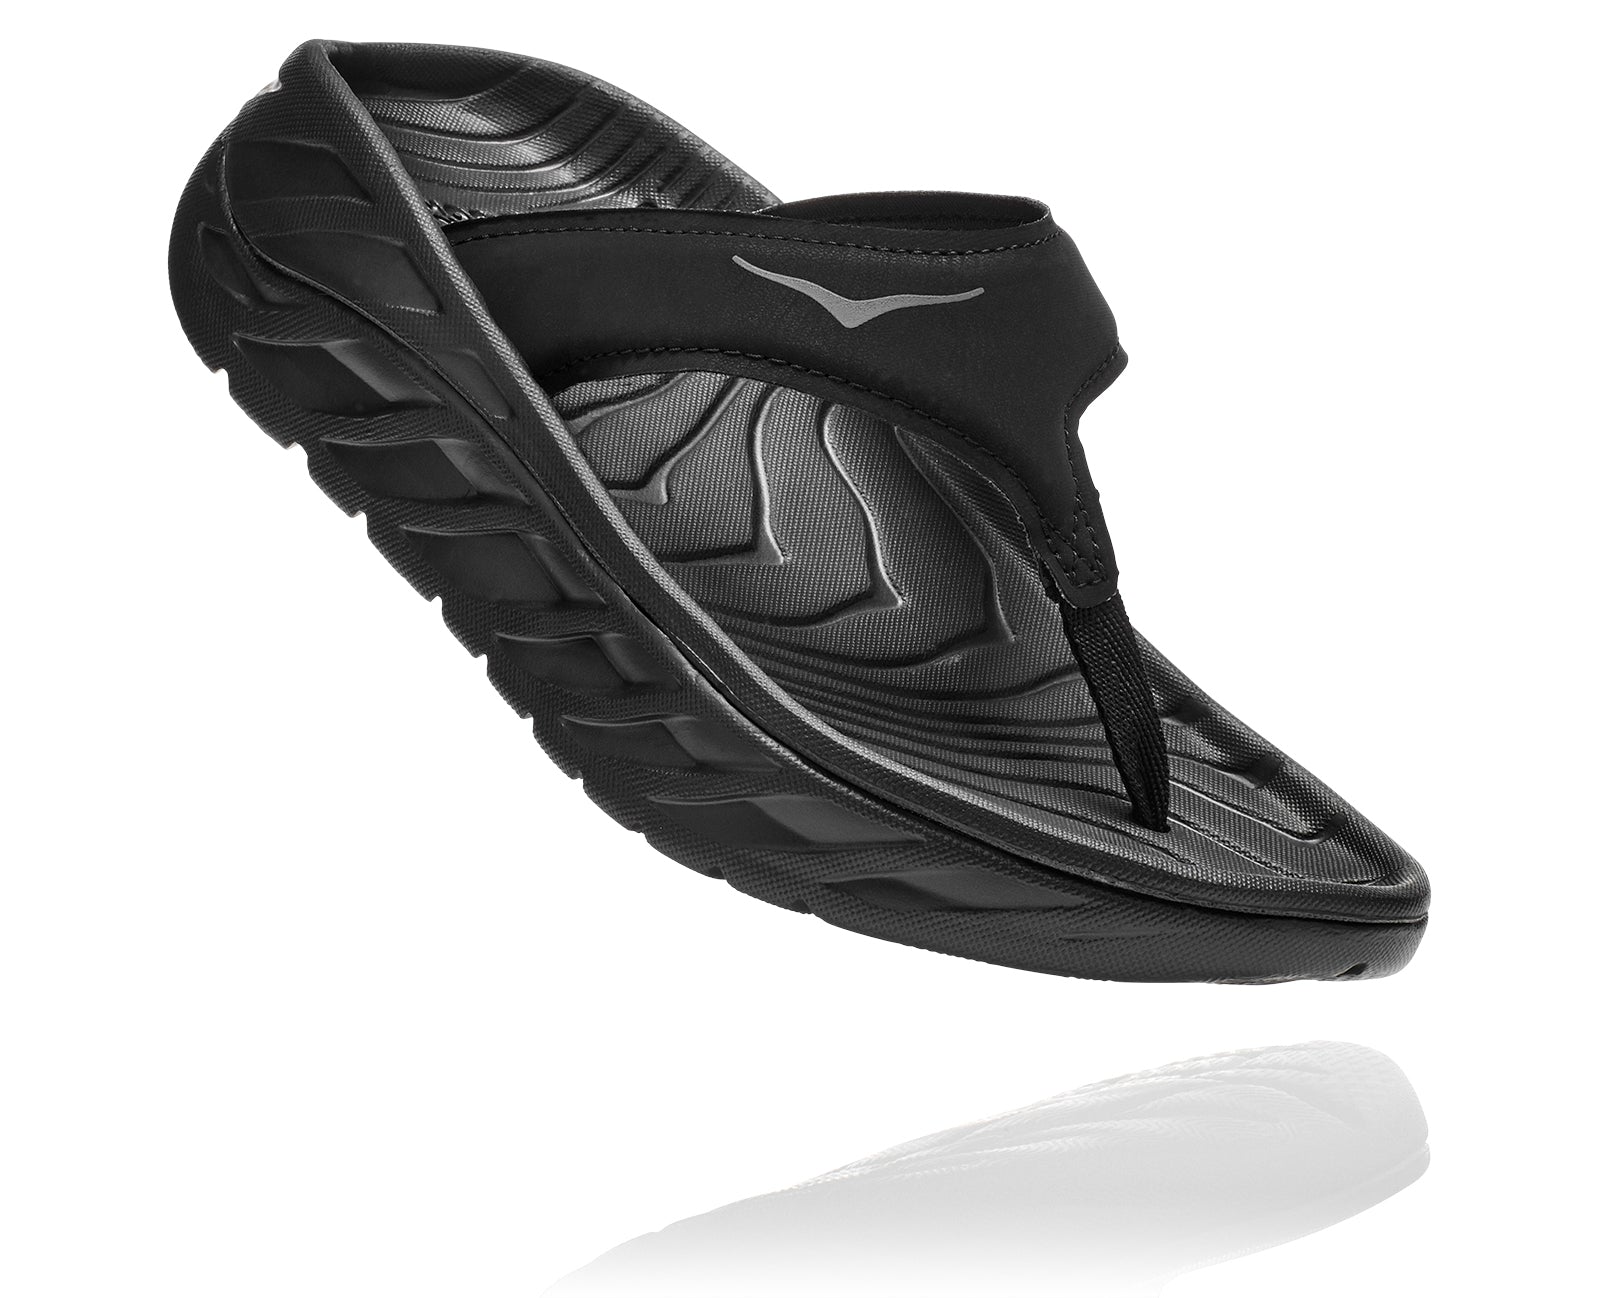 Angled lateral view of the Women's HOKA Ora Recovery Flip in the color Black/Dark Gull Gray